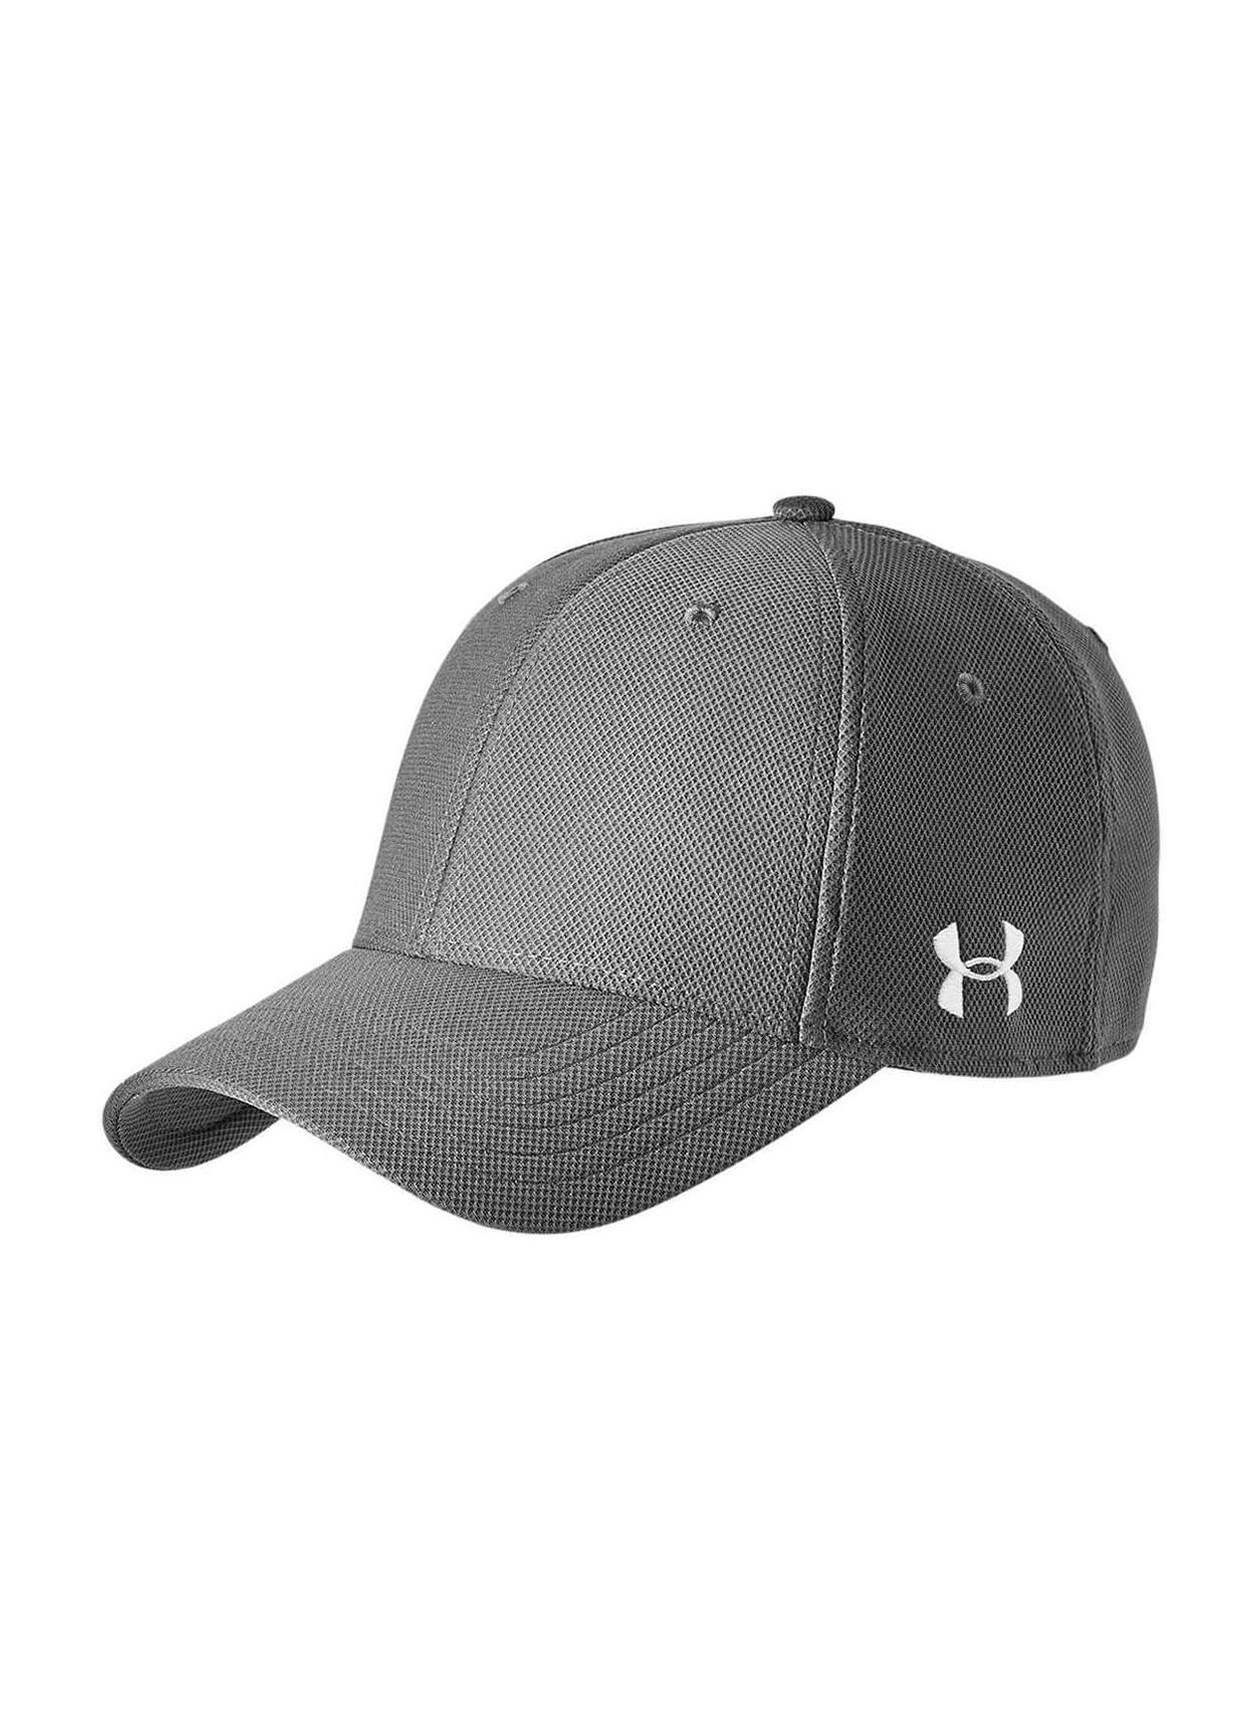 Under Armor Blitzing Stretch Fit Hat